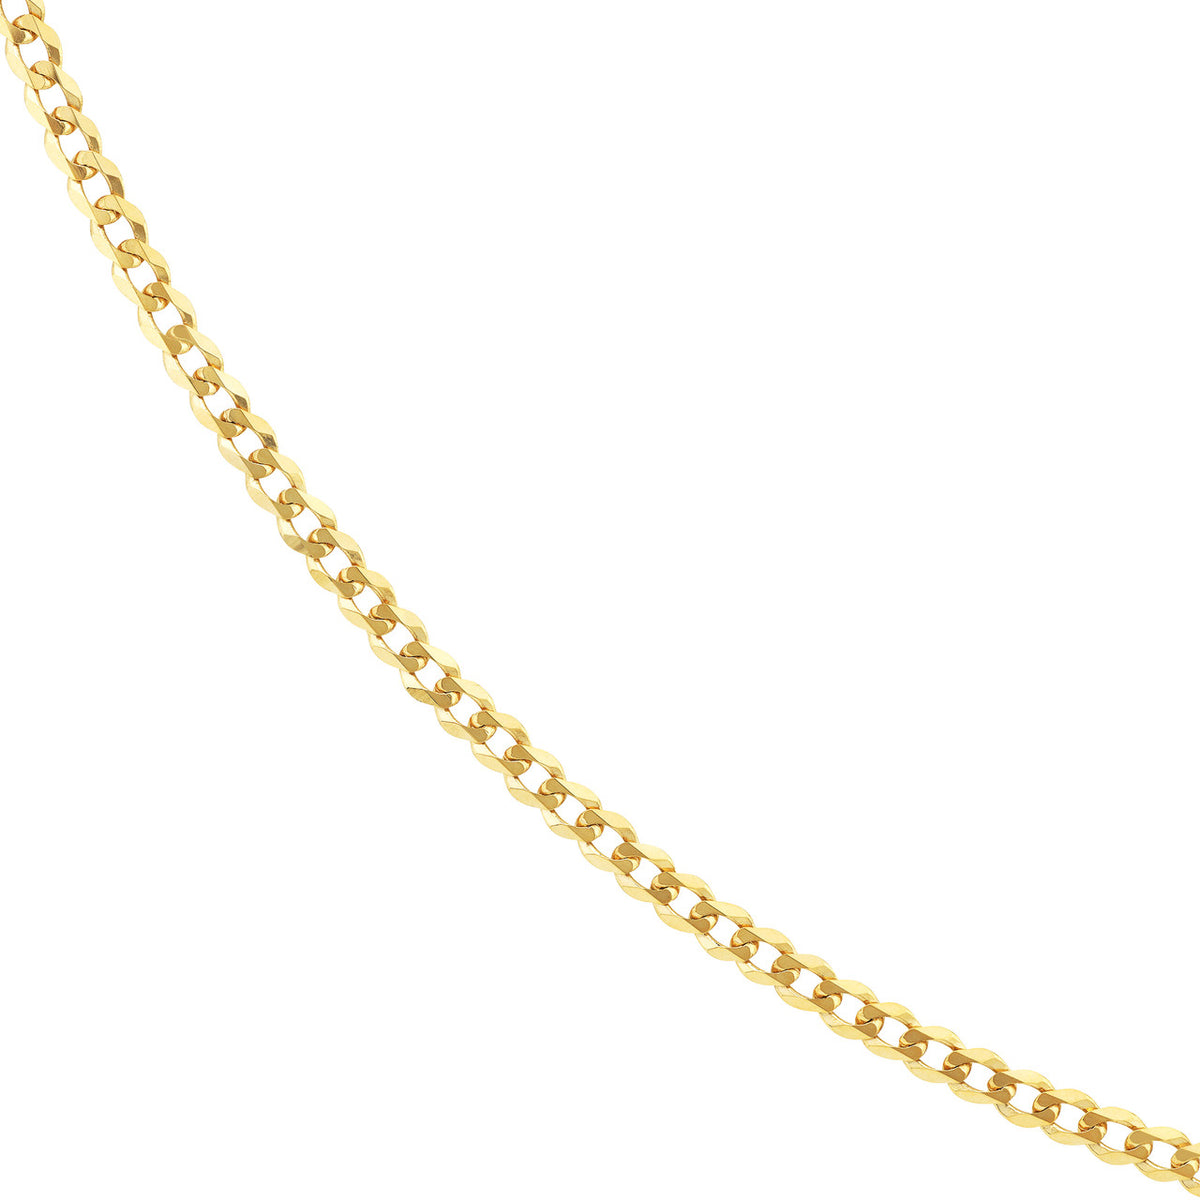 14K Yellow Gold or White Gold 4.95mm Curb Chain Necklace with Lobster Lock